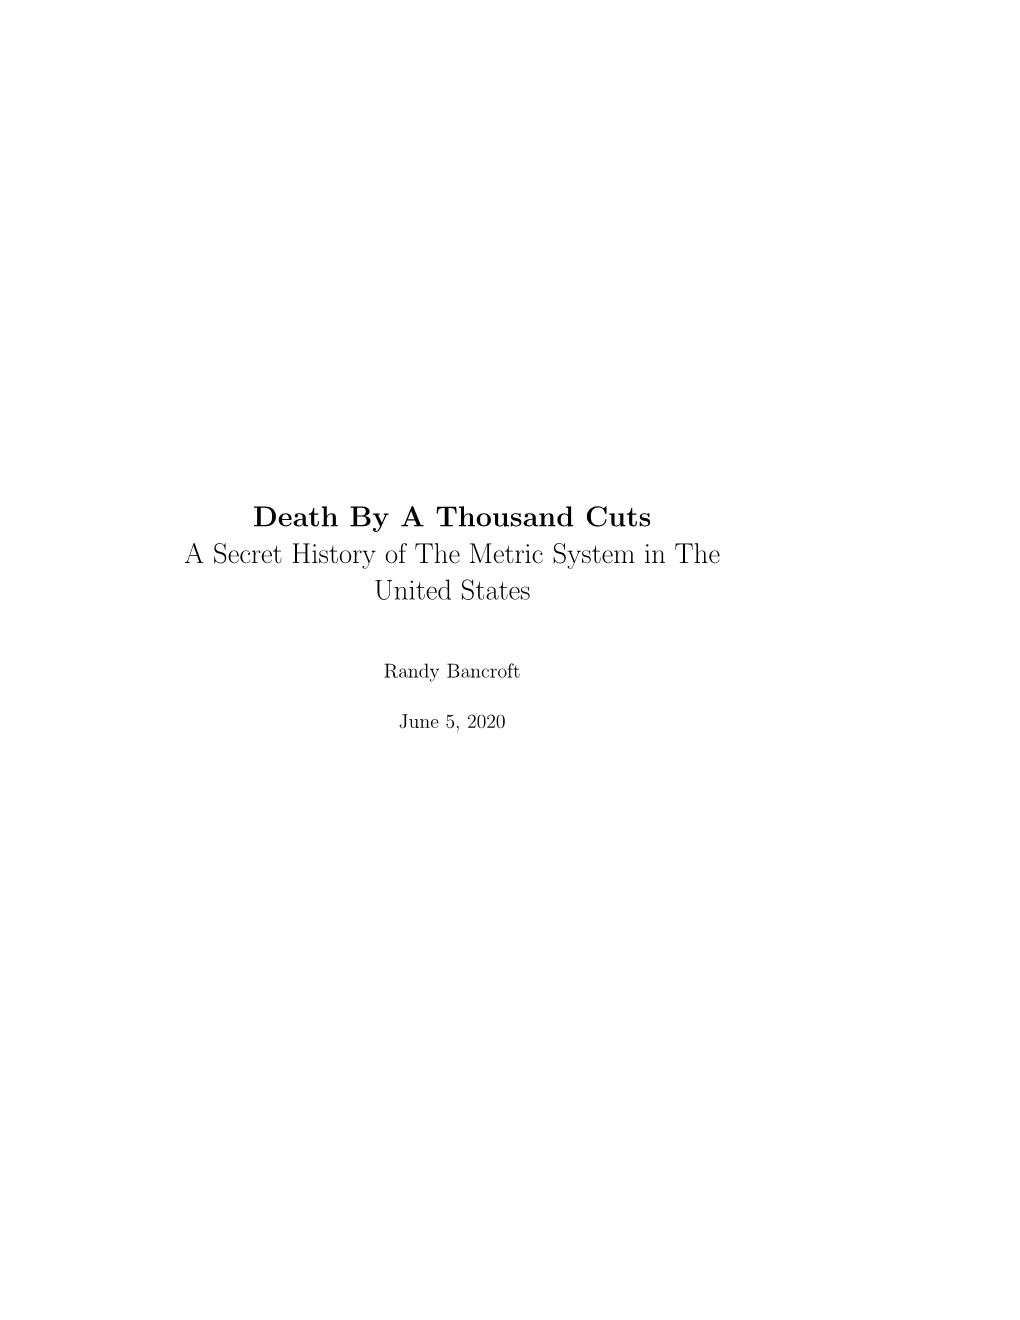 Death by 1000 Cuts Full Monograph 2020-06-05